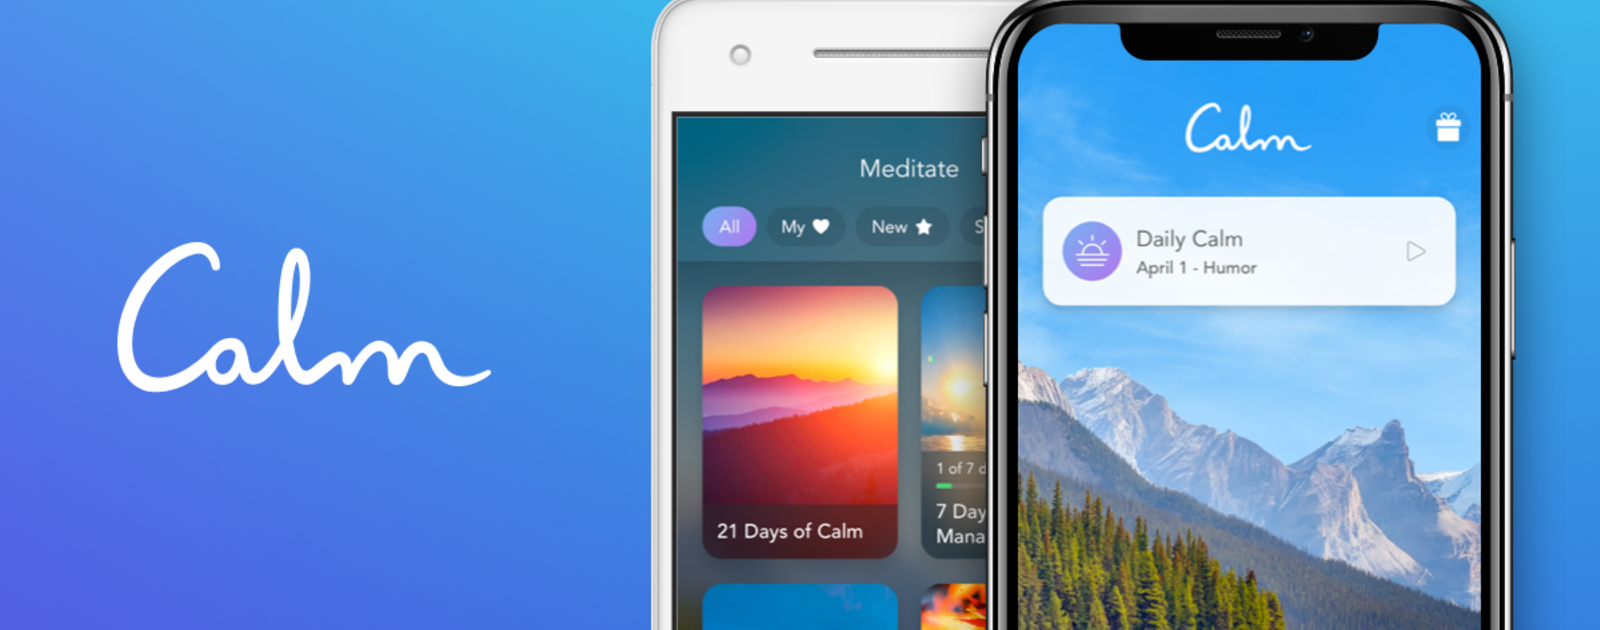 The Calm App Premium Subscription is Now Available | News | Well-Being ...